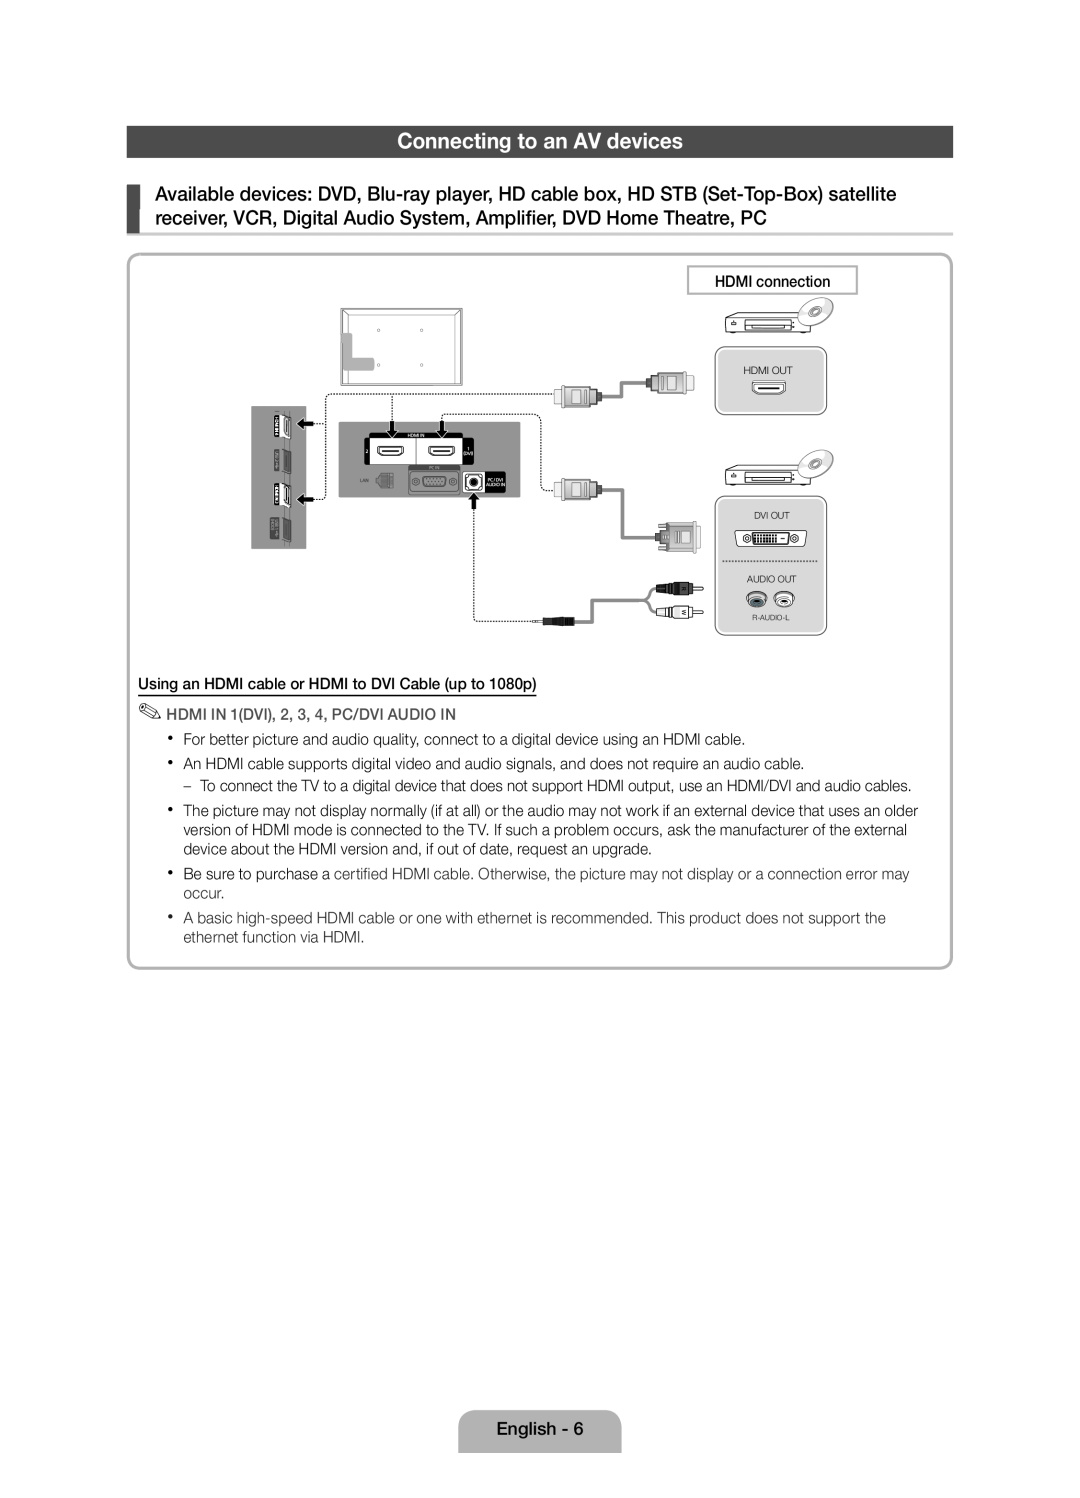 Samsung Series 5 user manual Connecting to an AV devices, HDMI IN 1DVI, 2, 3, 4, PC/DVI AUDIO IN 